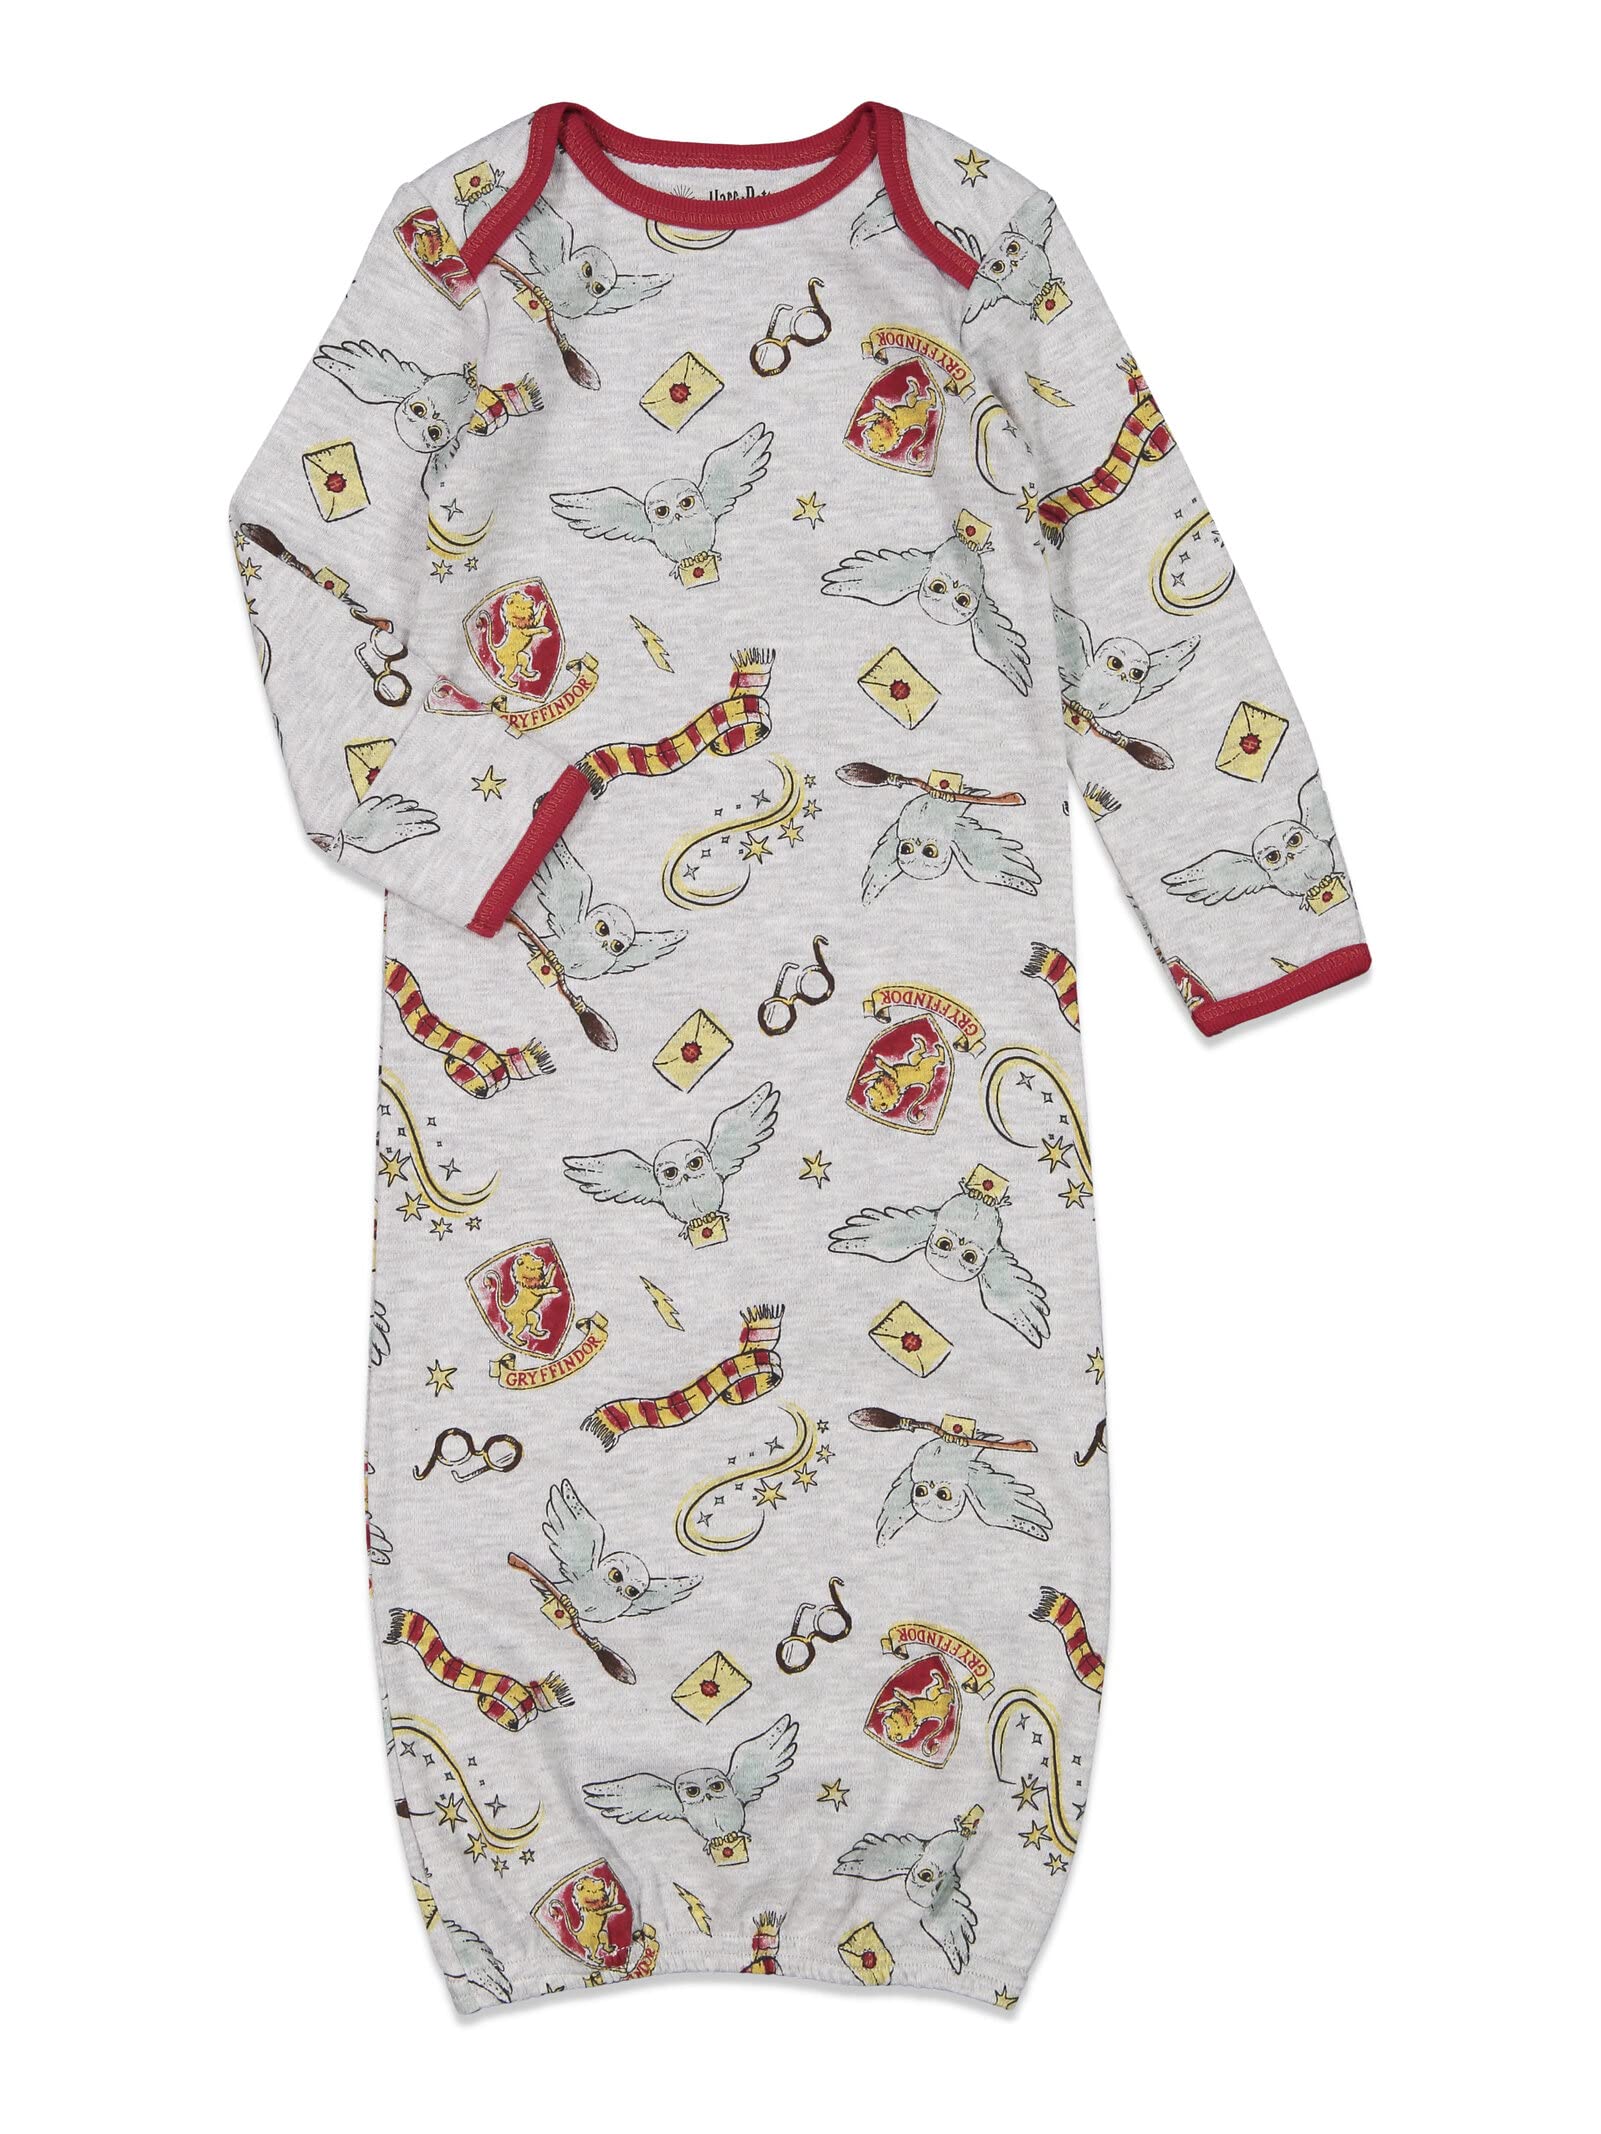 Harry Potter Hedwig Owl Baby Long Sleeve Swaddle Sleeper Gowns Newborn